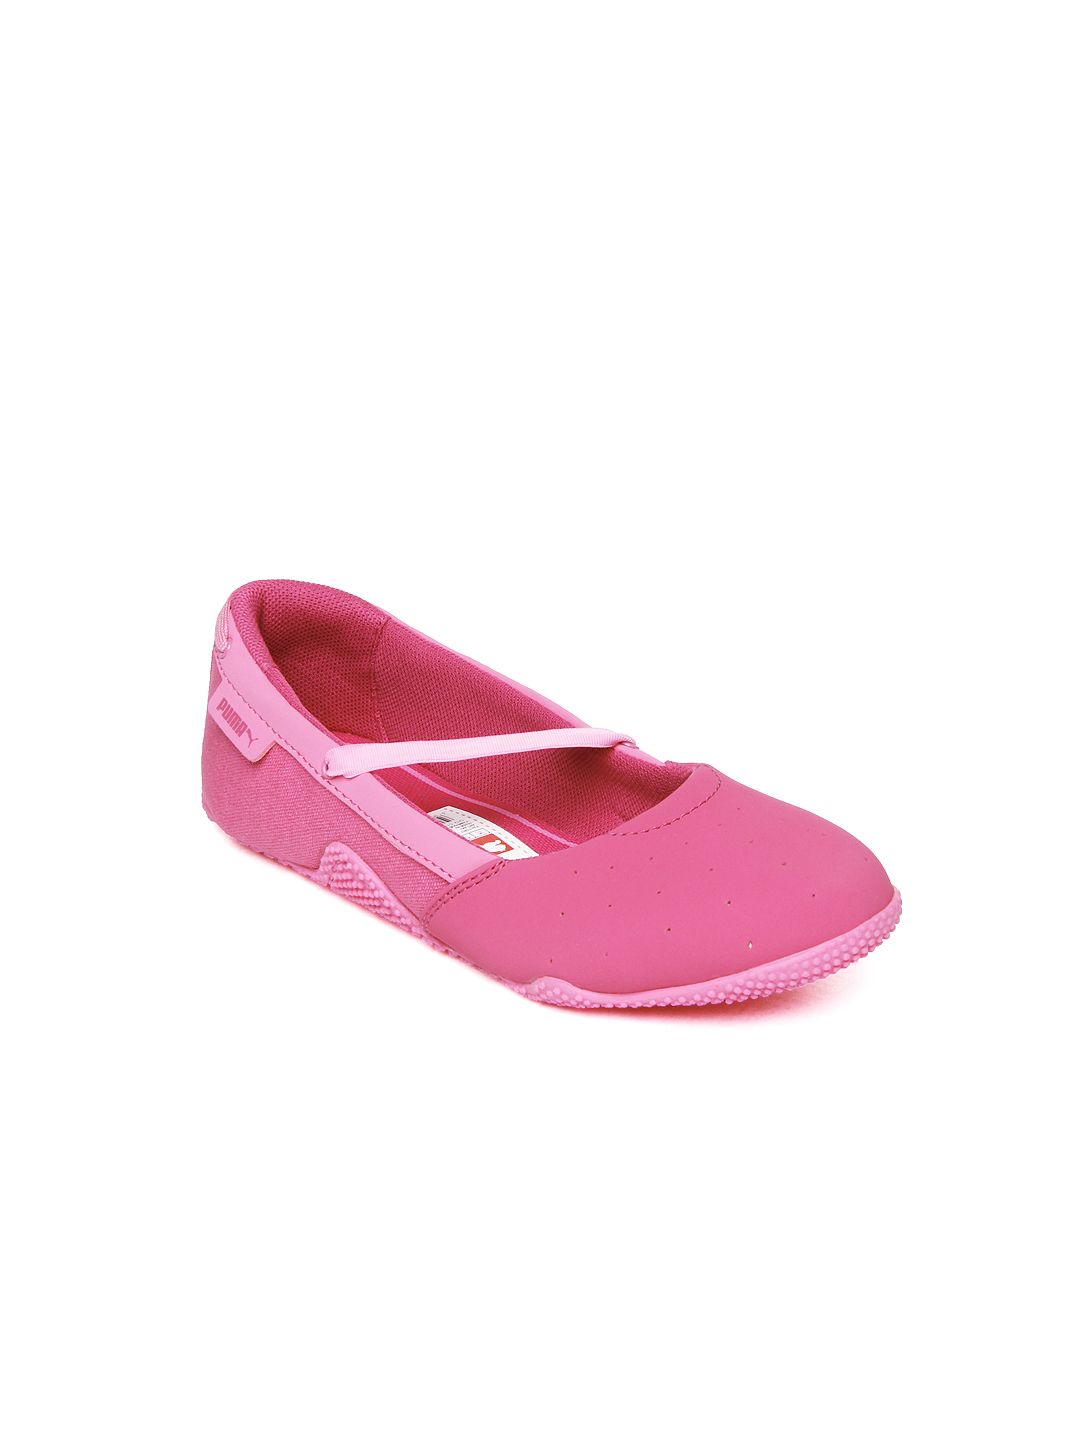 puma shoes for girls with price Sale,up 